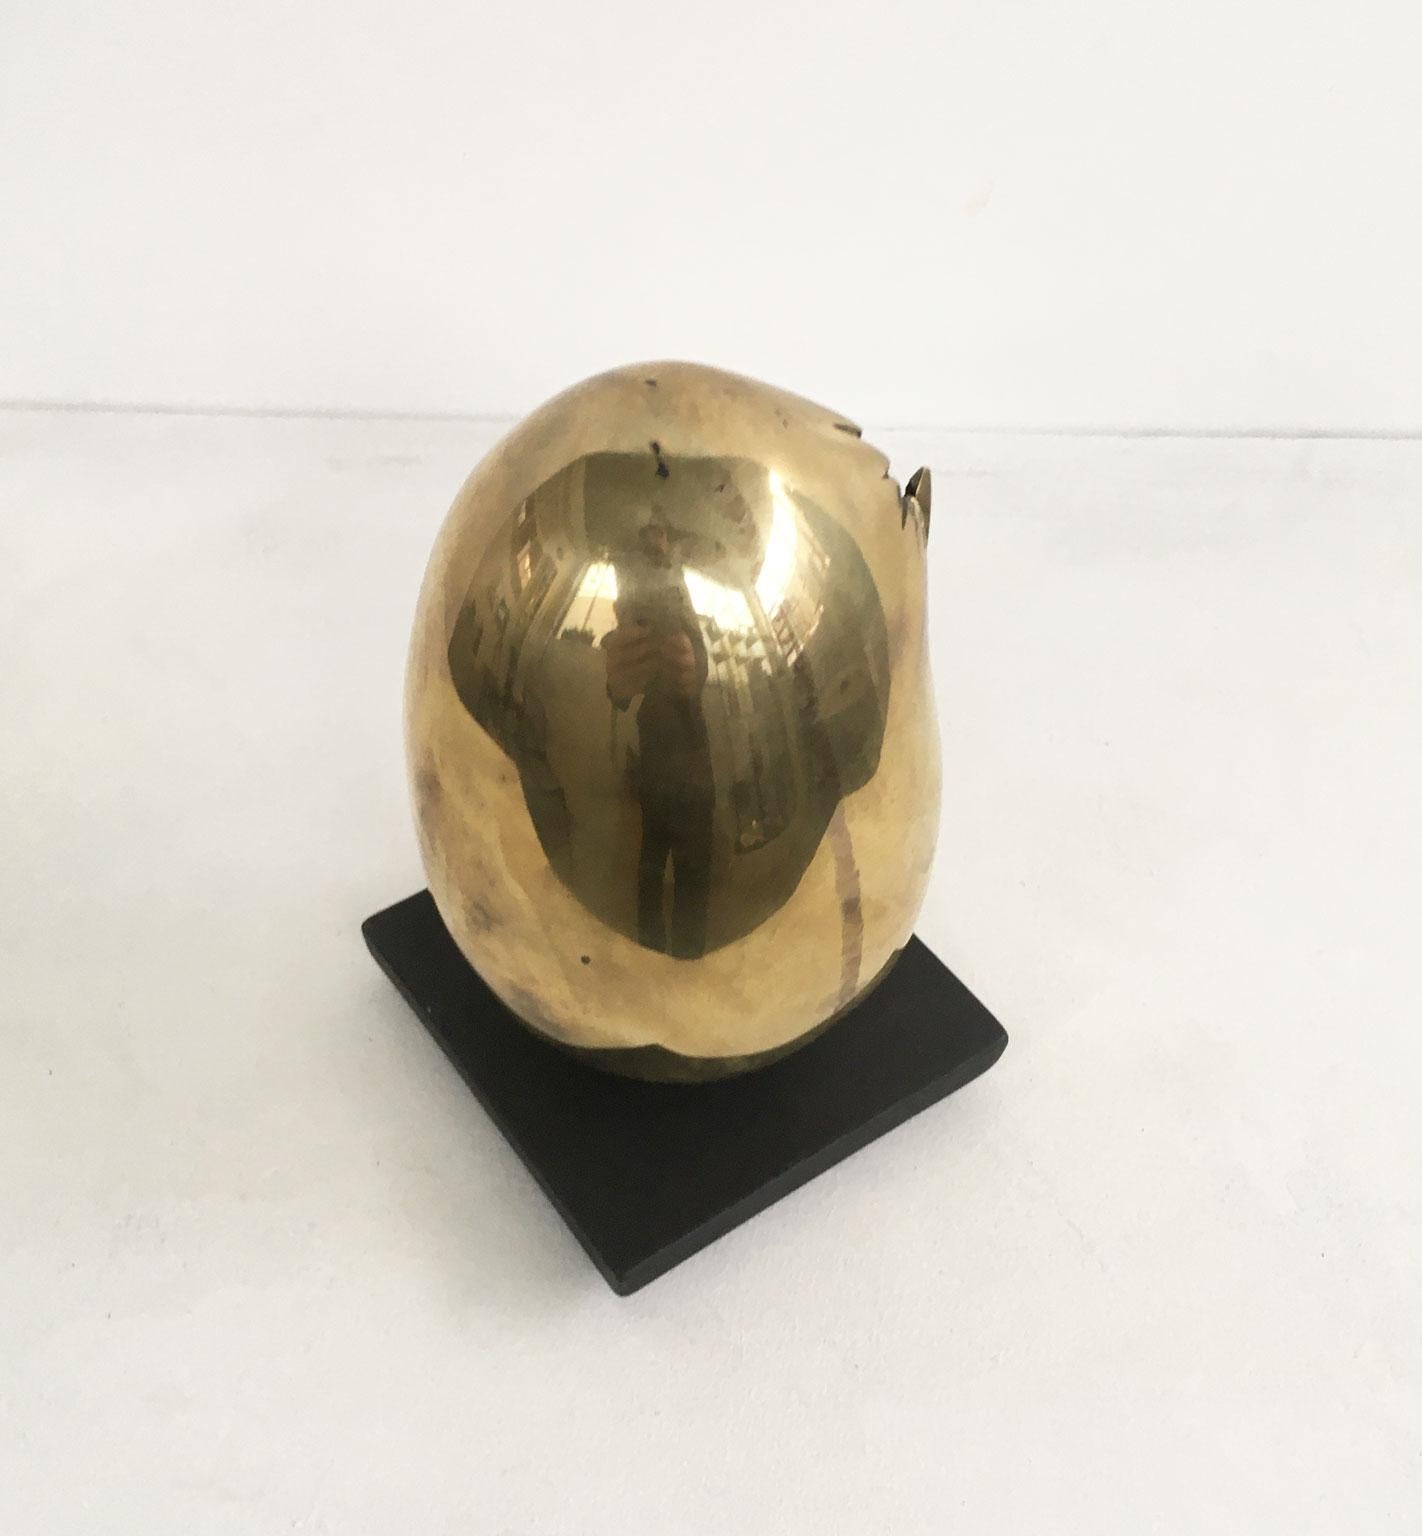 1978 Italy Bronze Abstract Sculpture by Fanna Roncoroni Forma Ovale Oval Shape In Good Condition For Sale In Brescia, IT